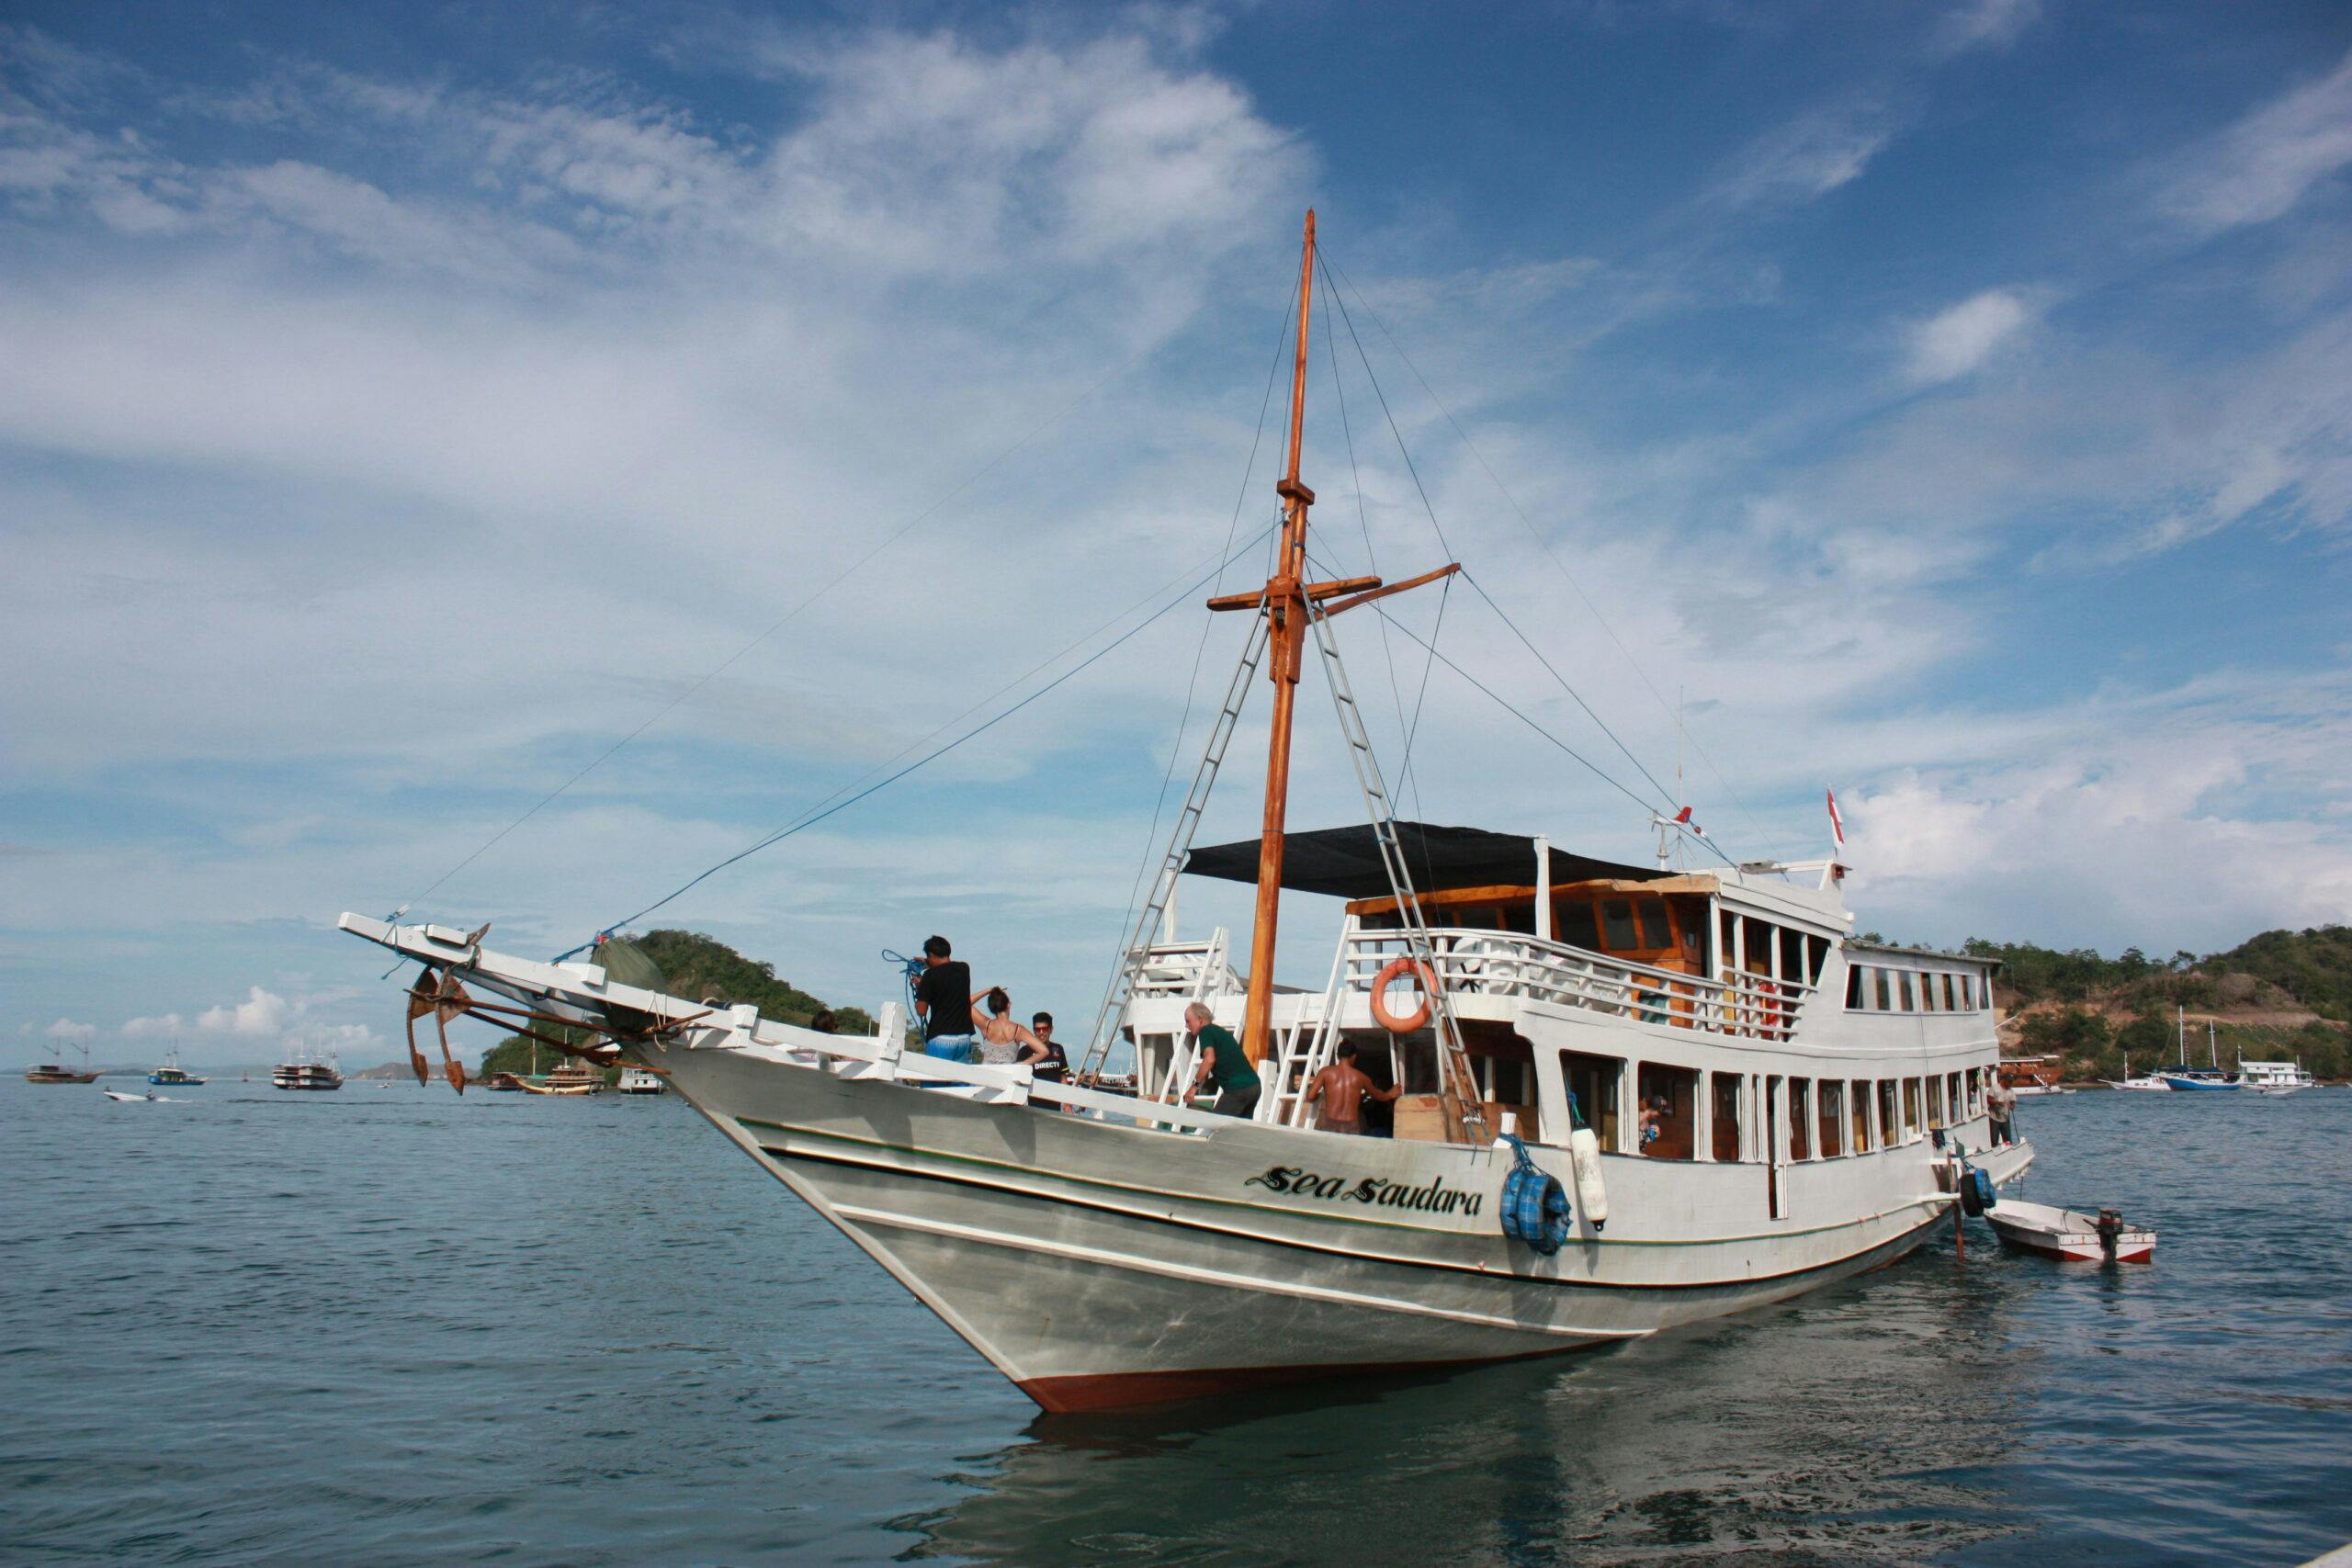 Can I go from Bali to Komodo on Boat?